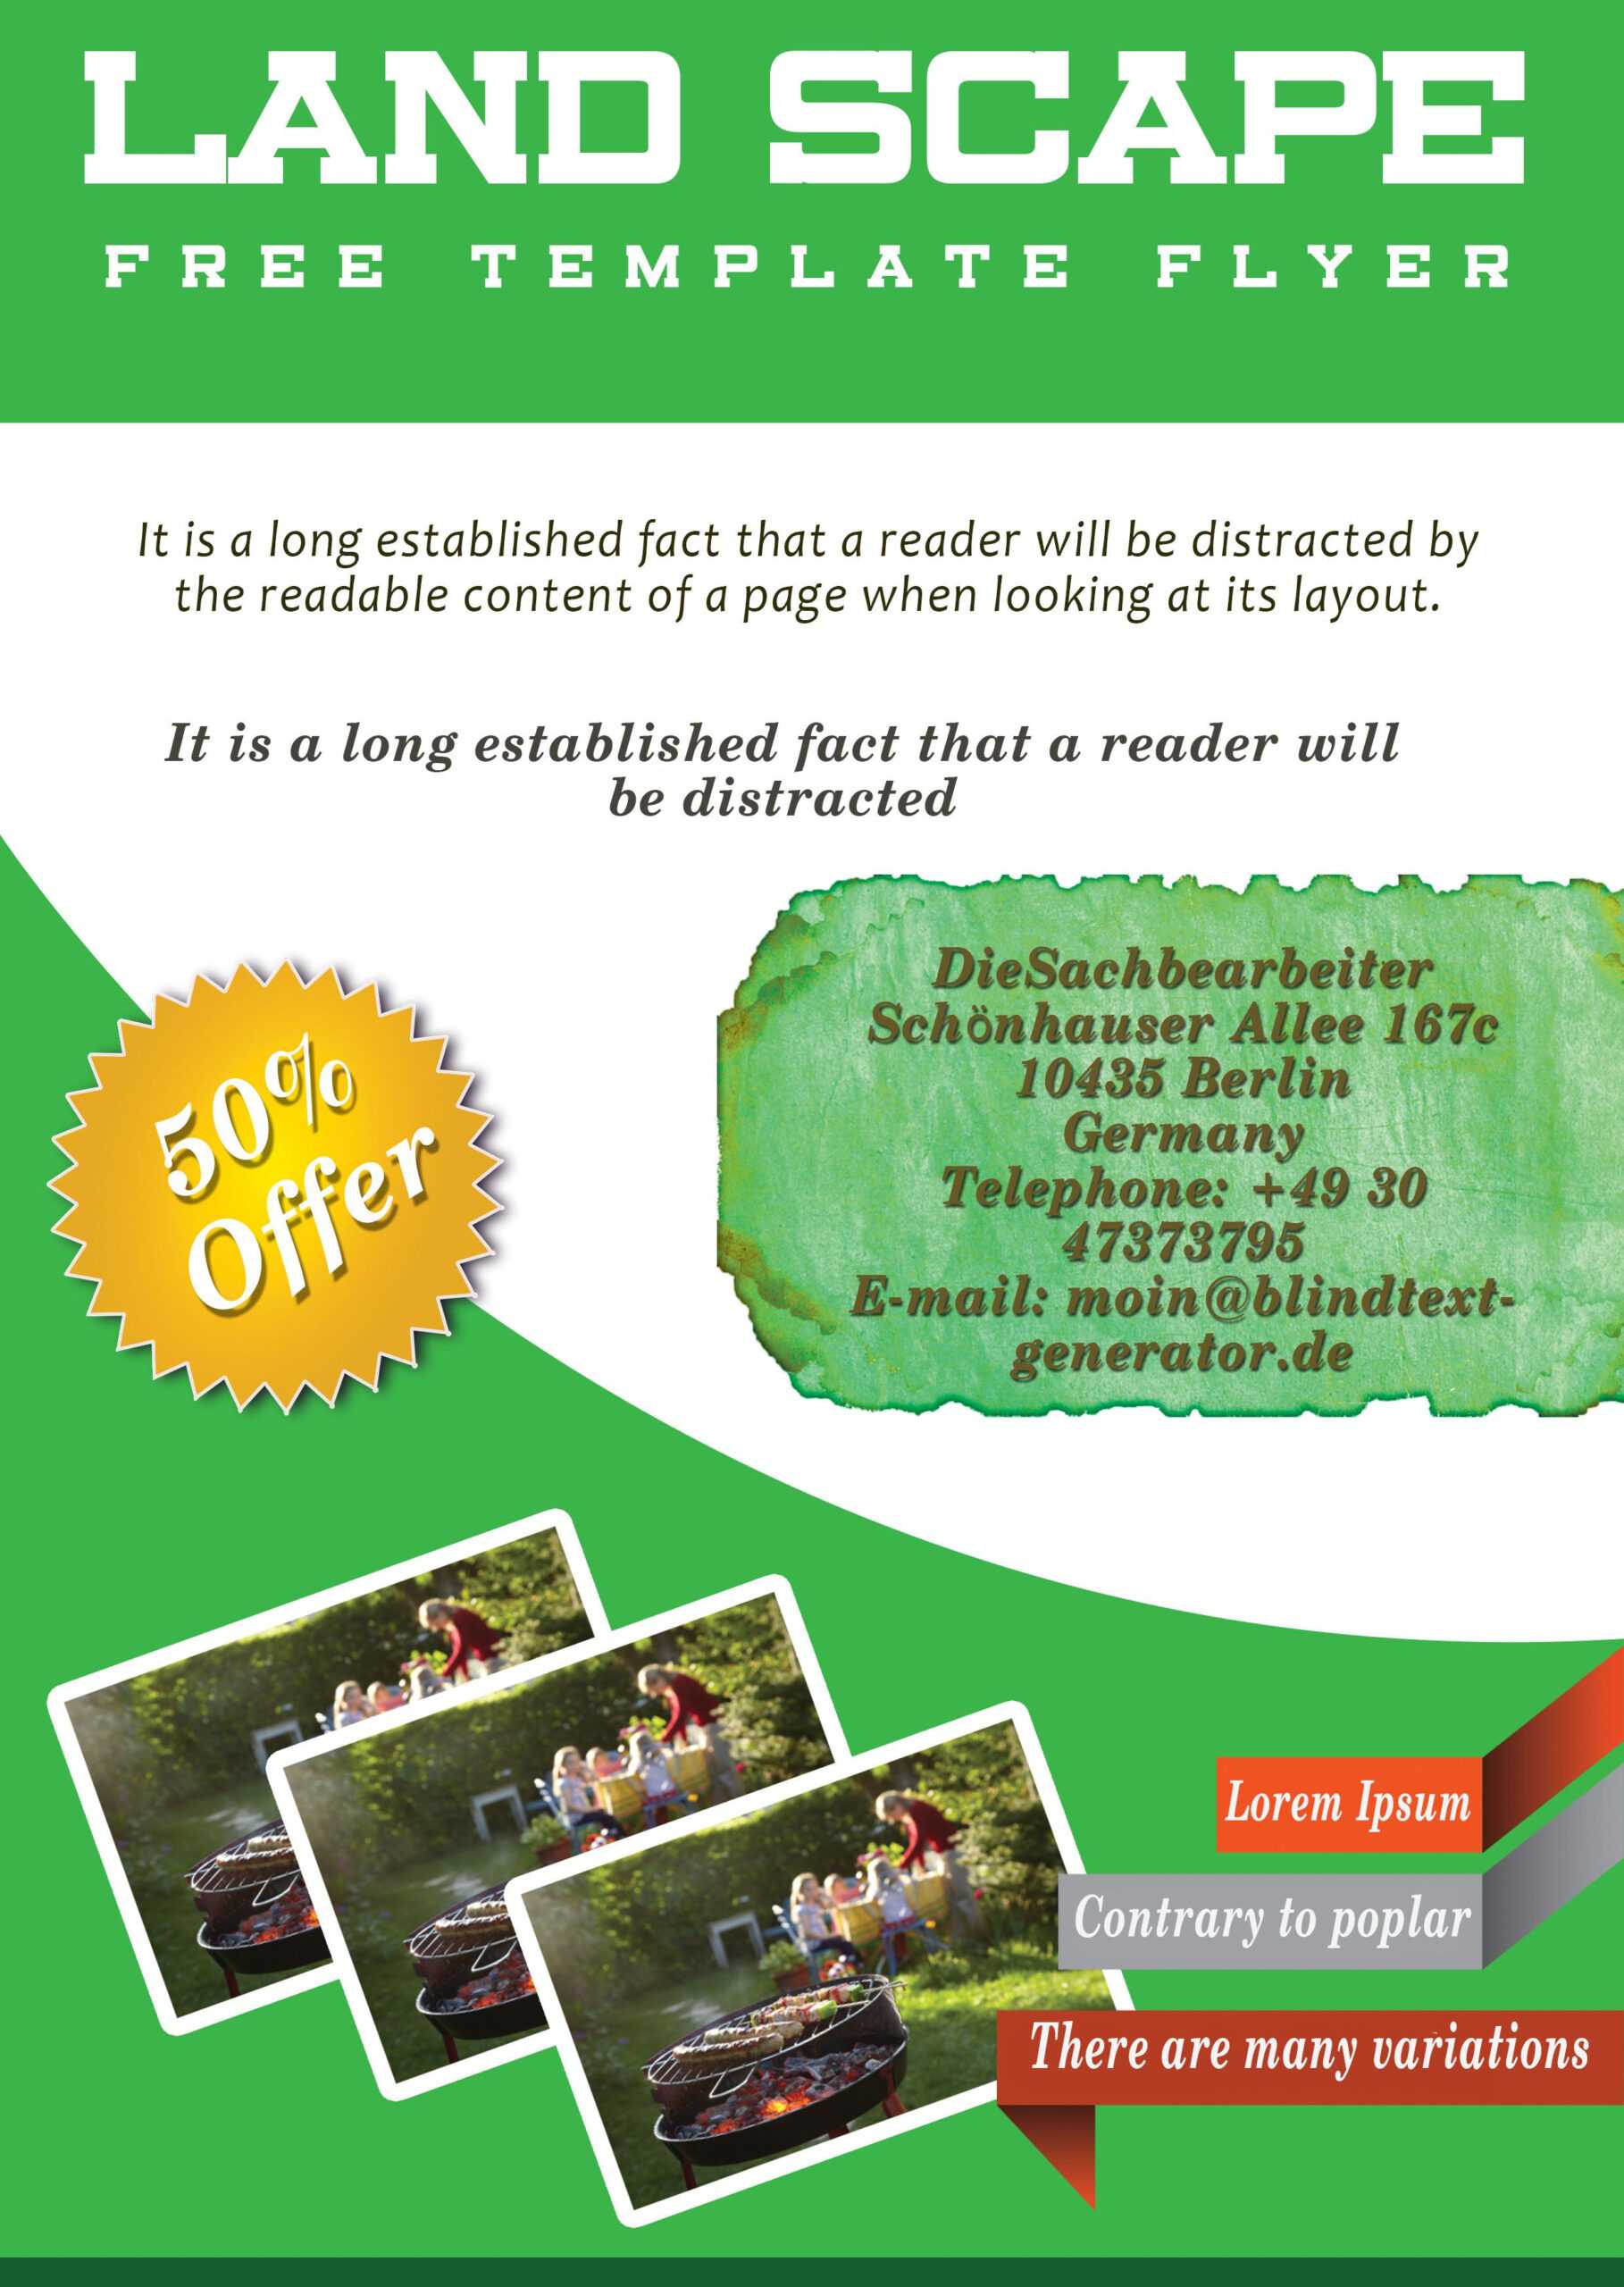 Free Landscaping Flyer Templates To Power Lawn Care Intended For Free Lawn Mowing Flyer Template